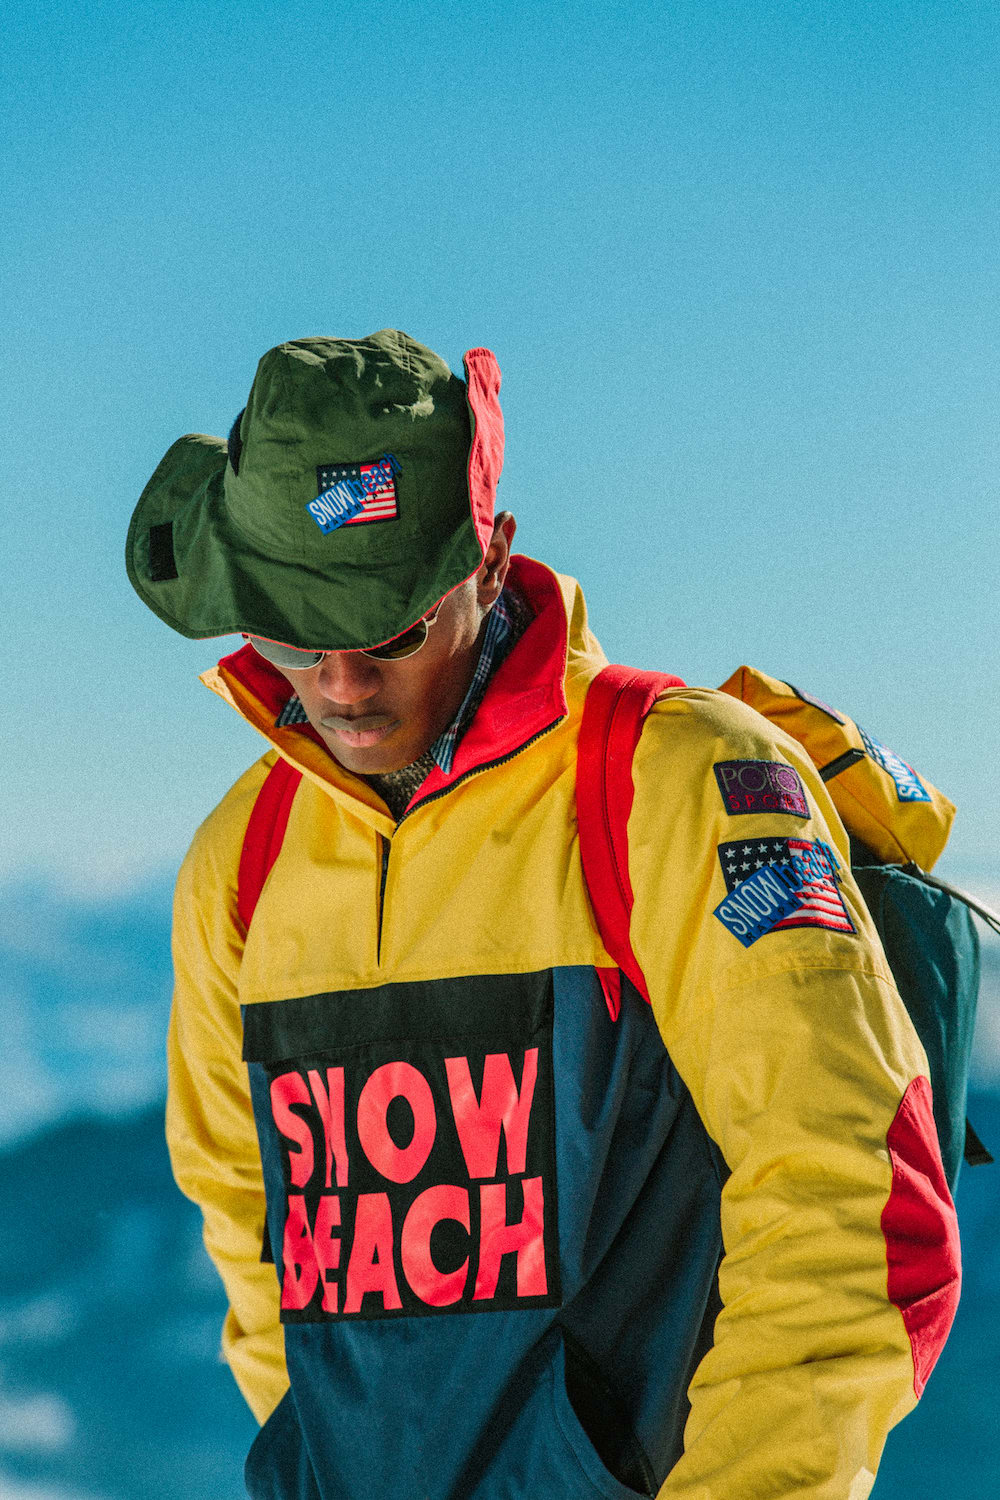 Polo Ralph Lauren Is Re-Releasing the Iconic Snow Beach Collection